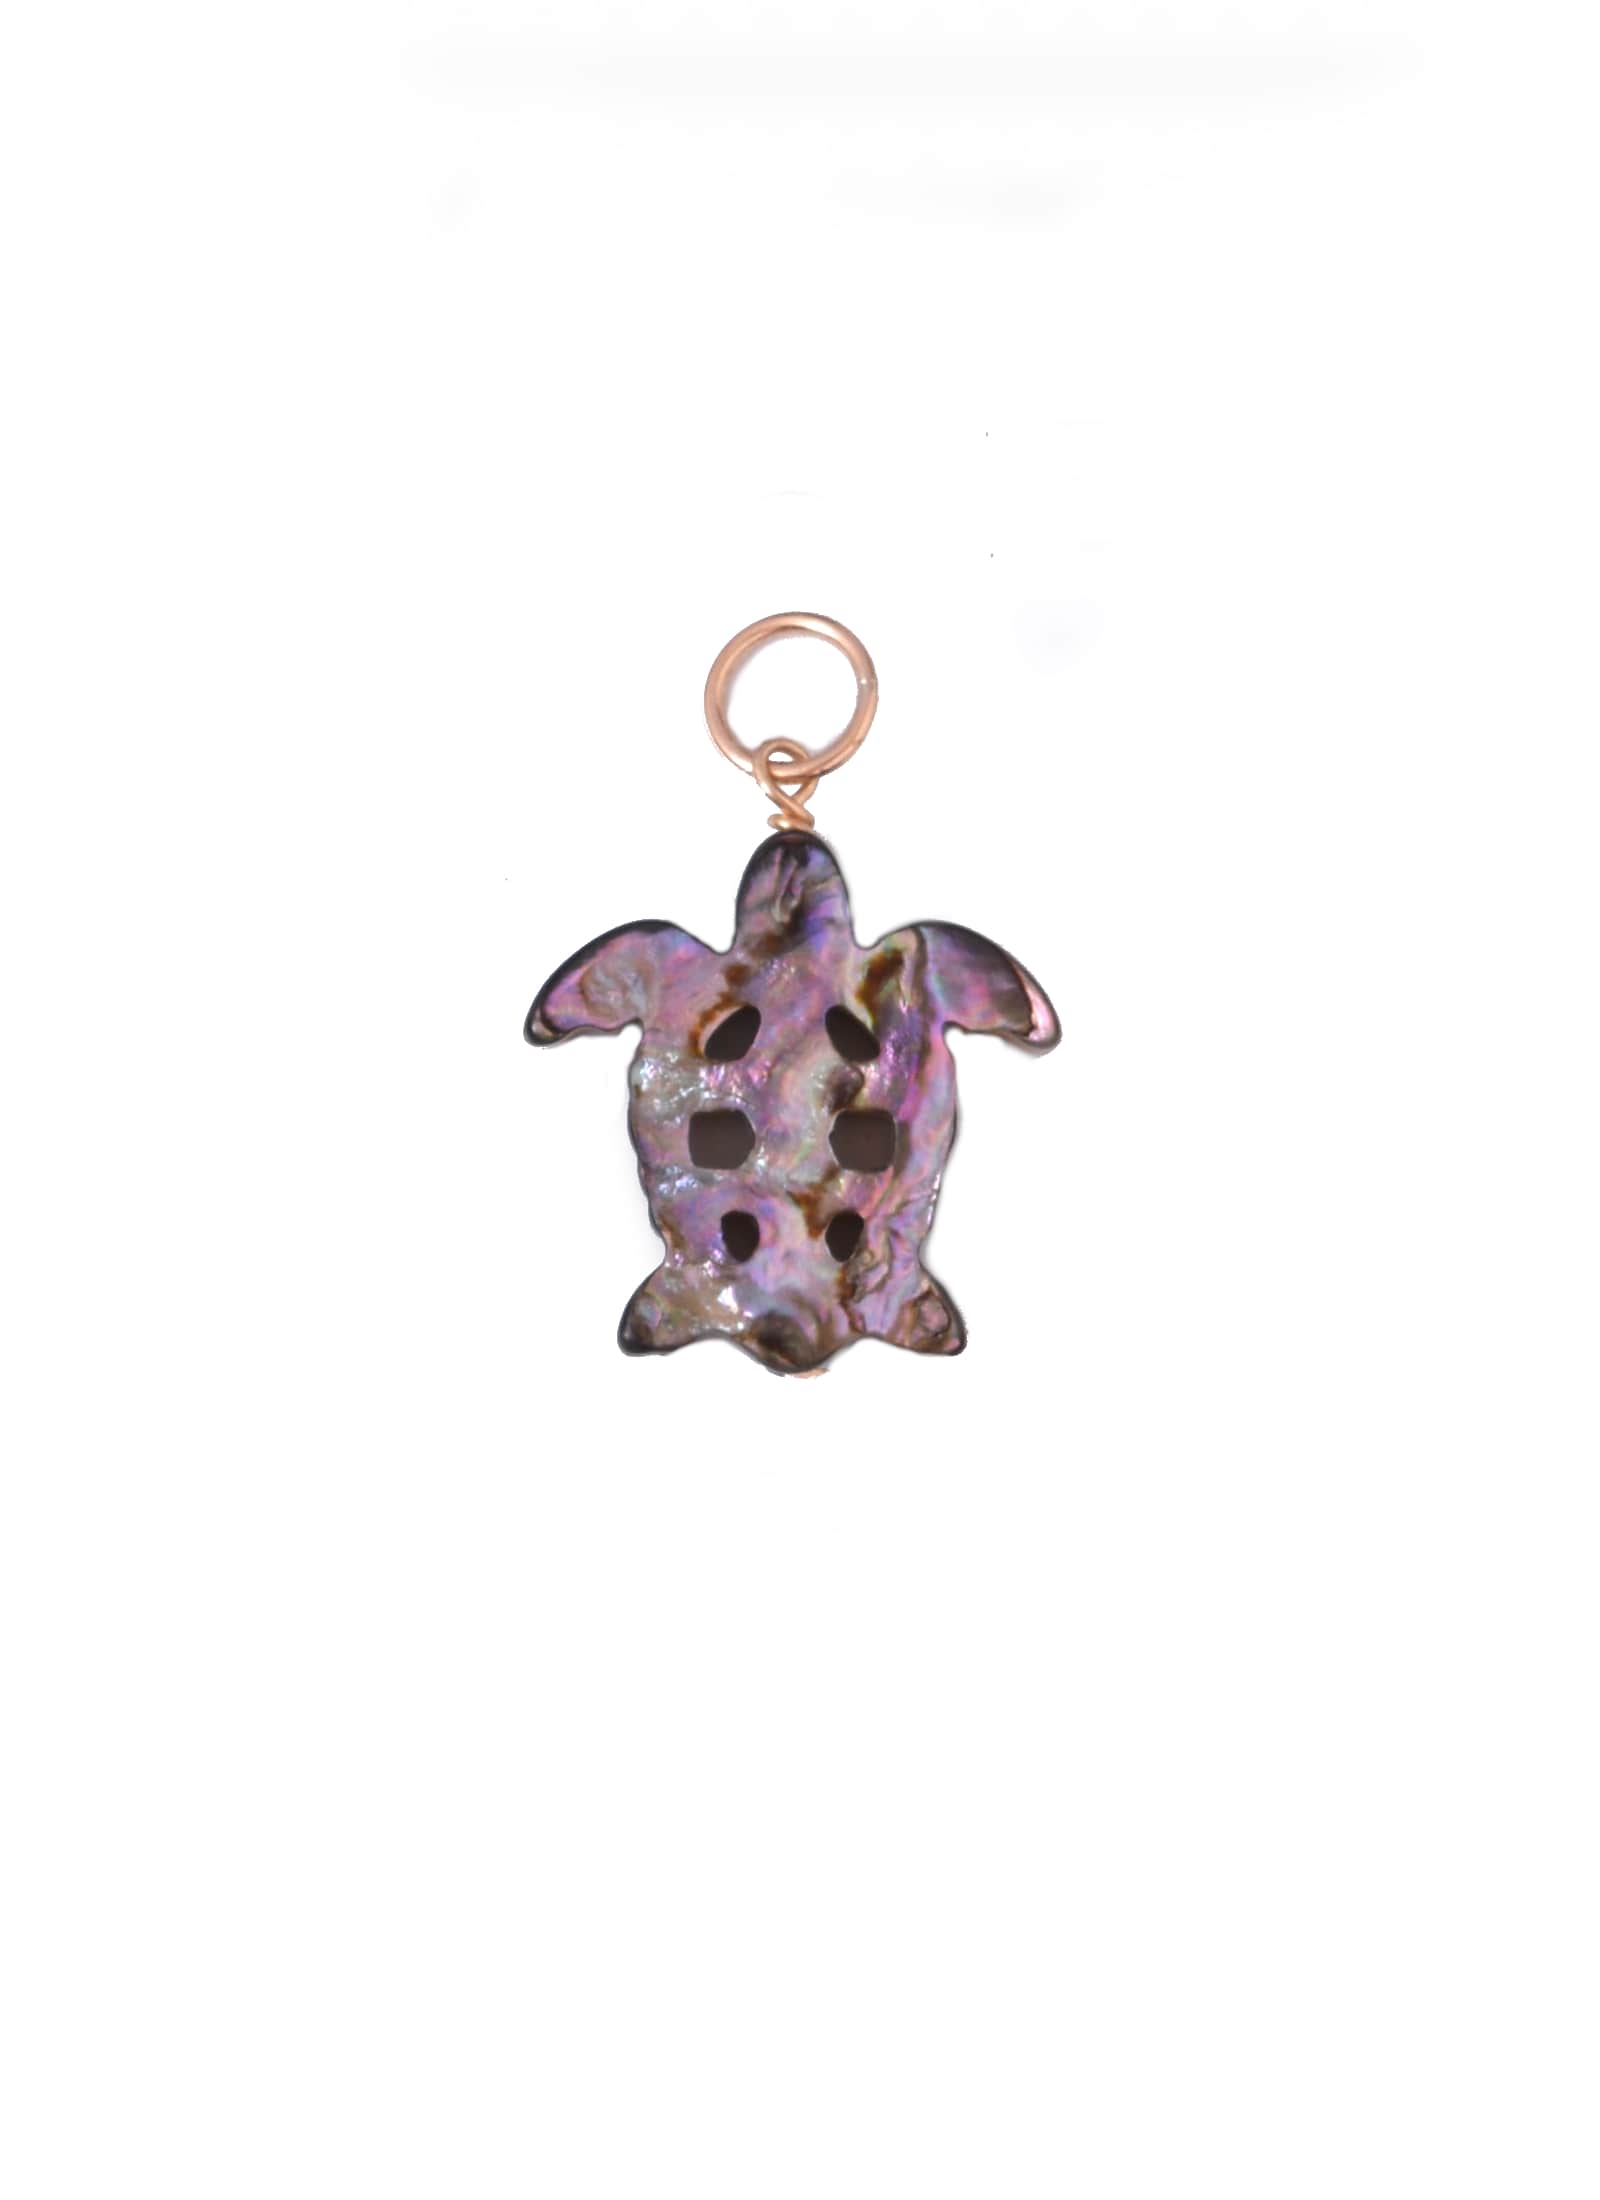 Carved Turtle Charm in Abalone